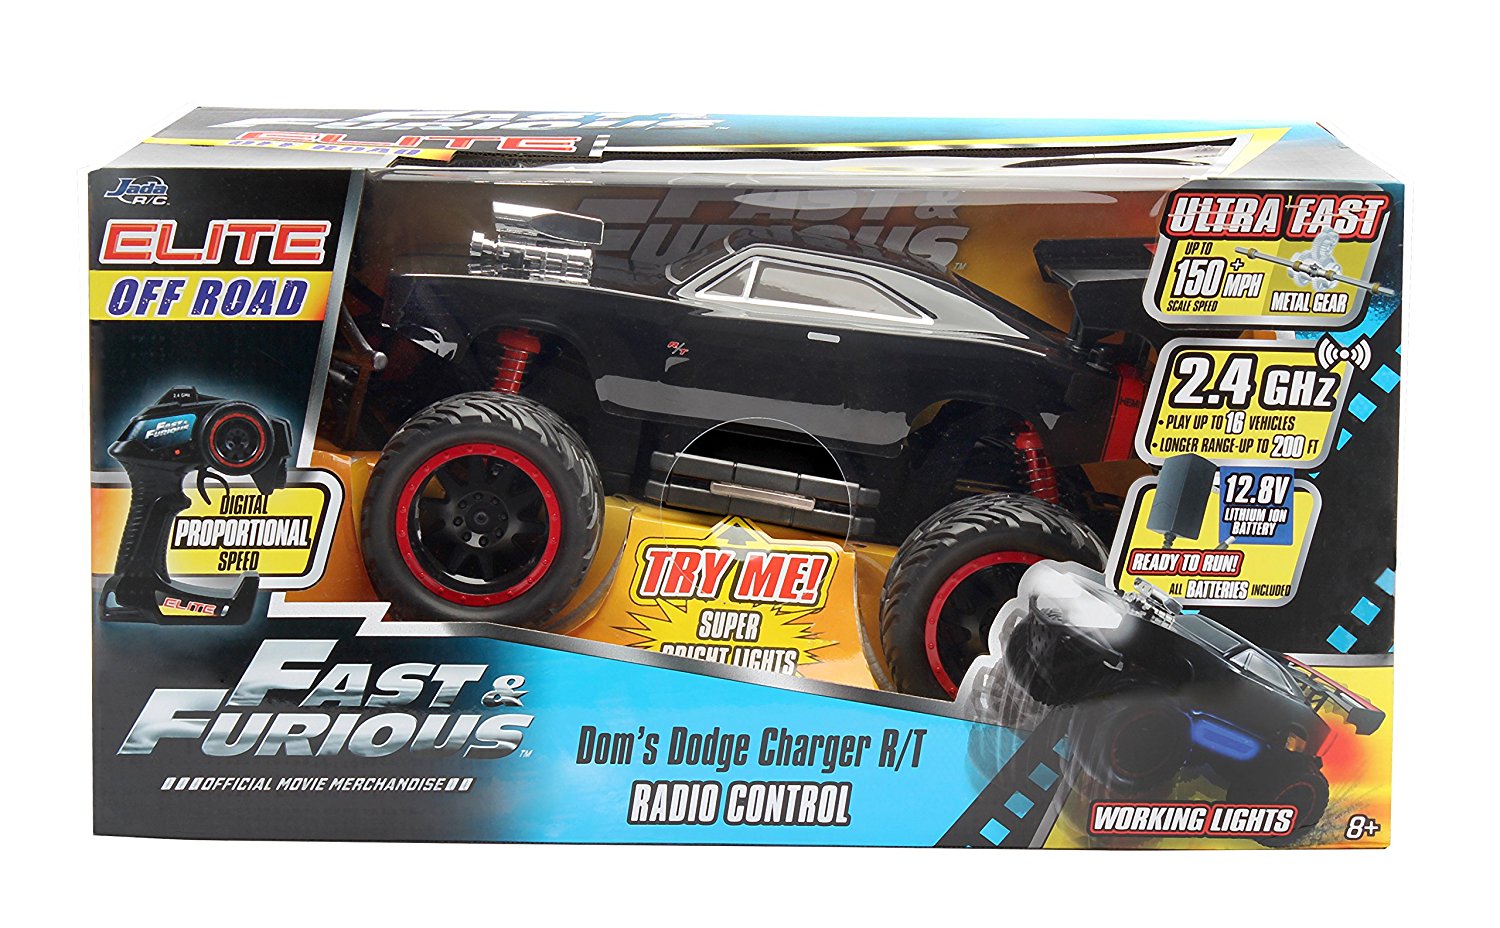 Fast & Furious 1:12 Elite Off Road R/C – Just $29.97!